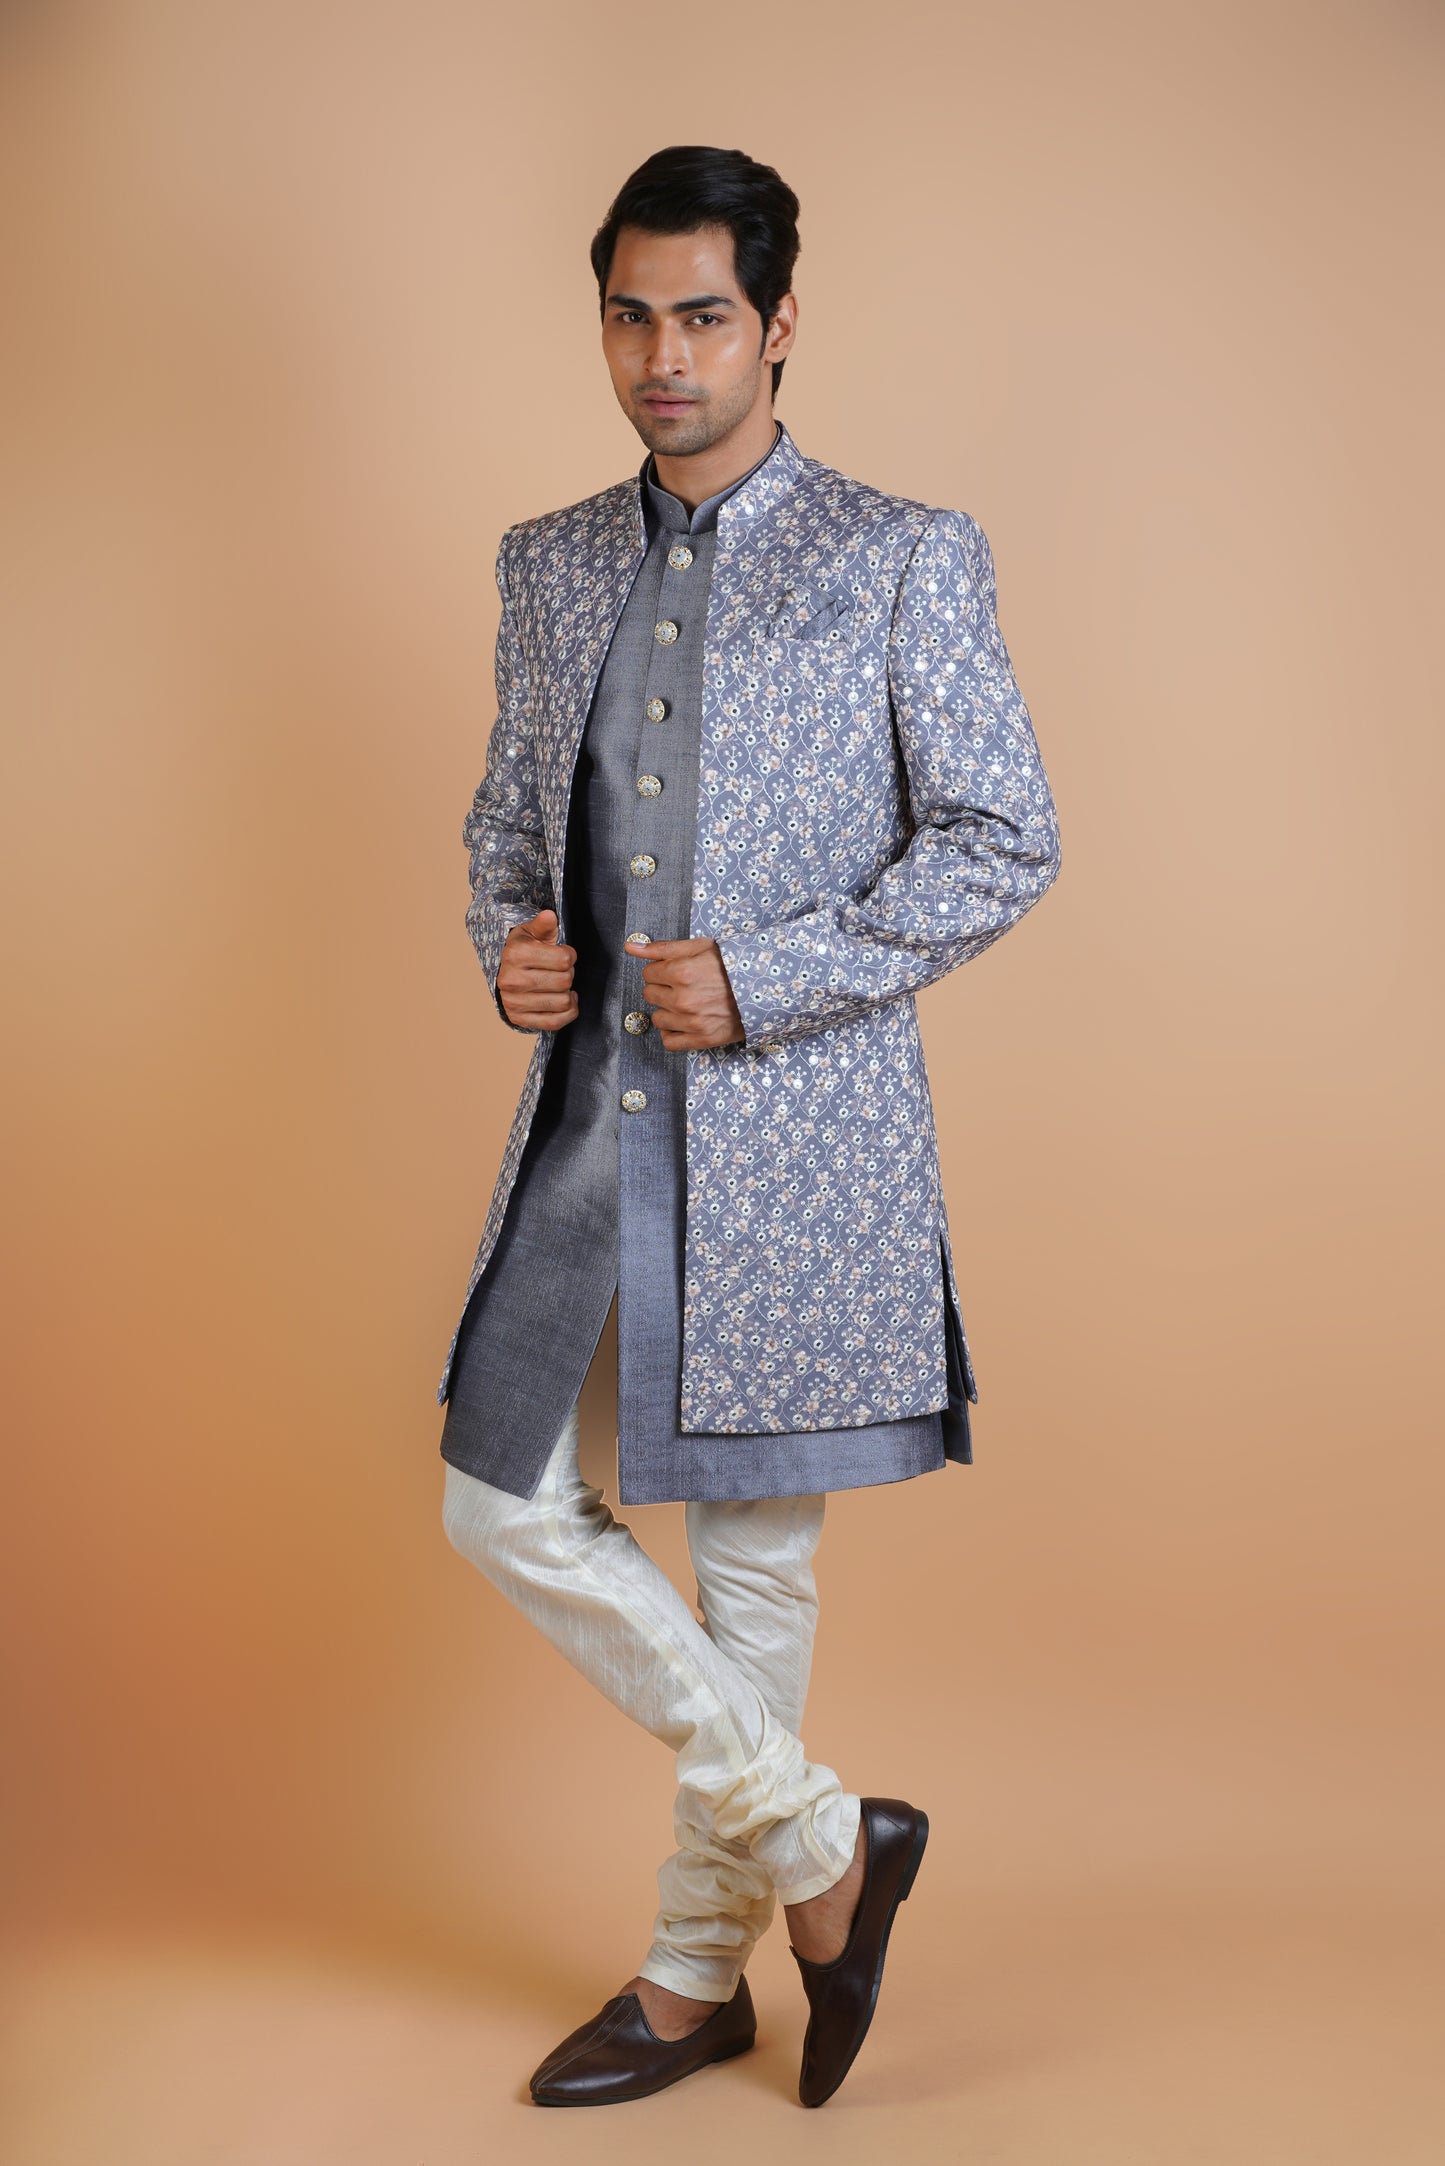 Bestselling Royal Blue Colour Indo Western Kurta Set with Exclusive Pattern